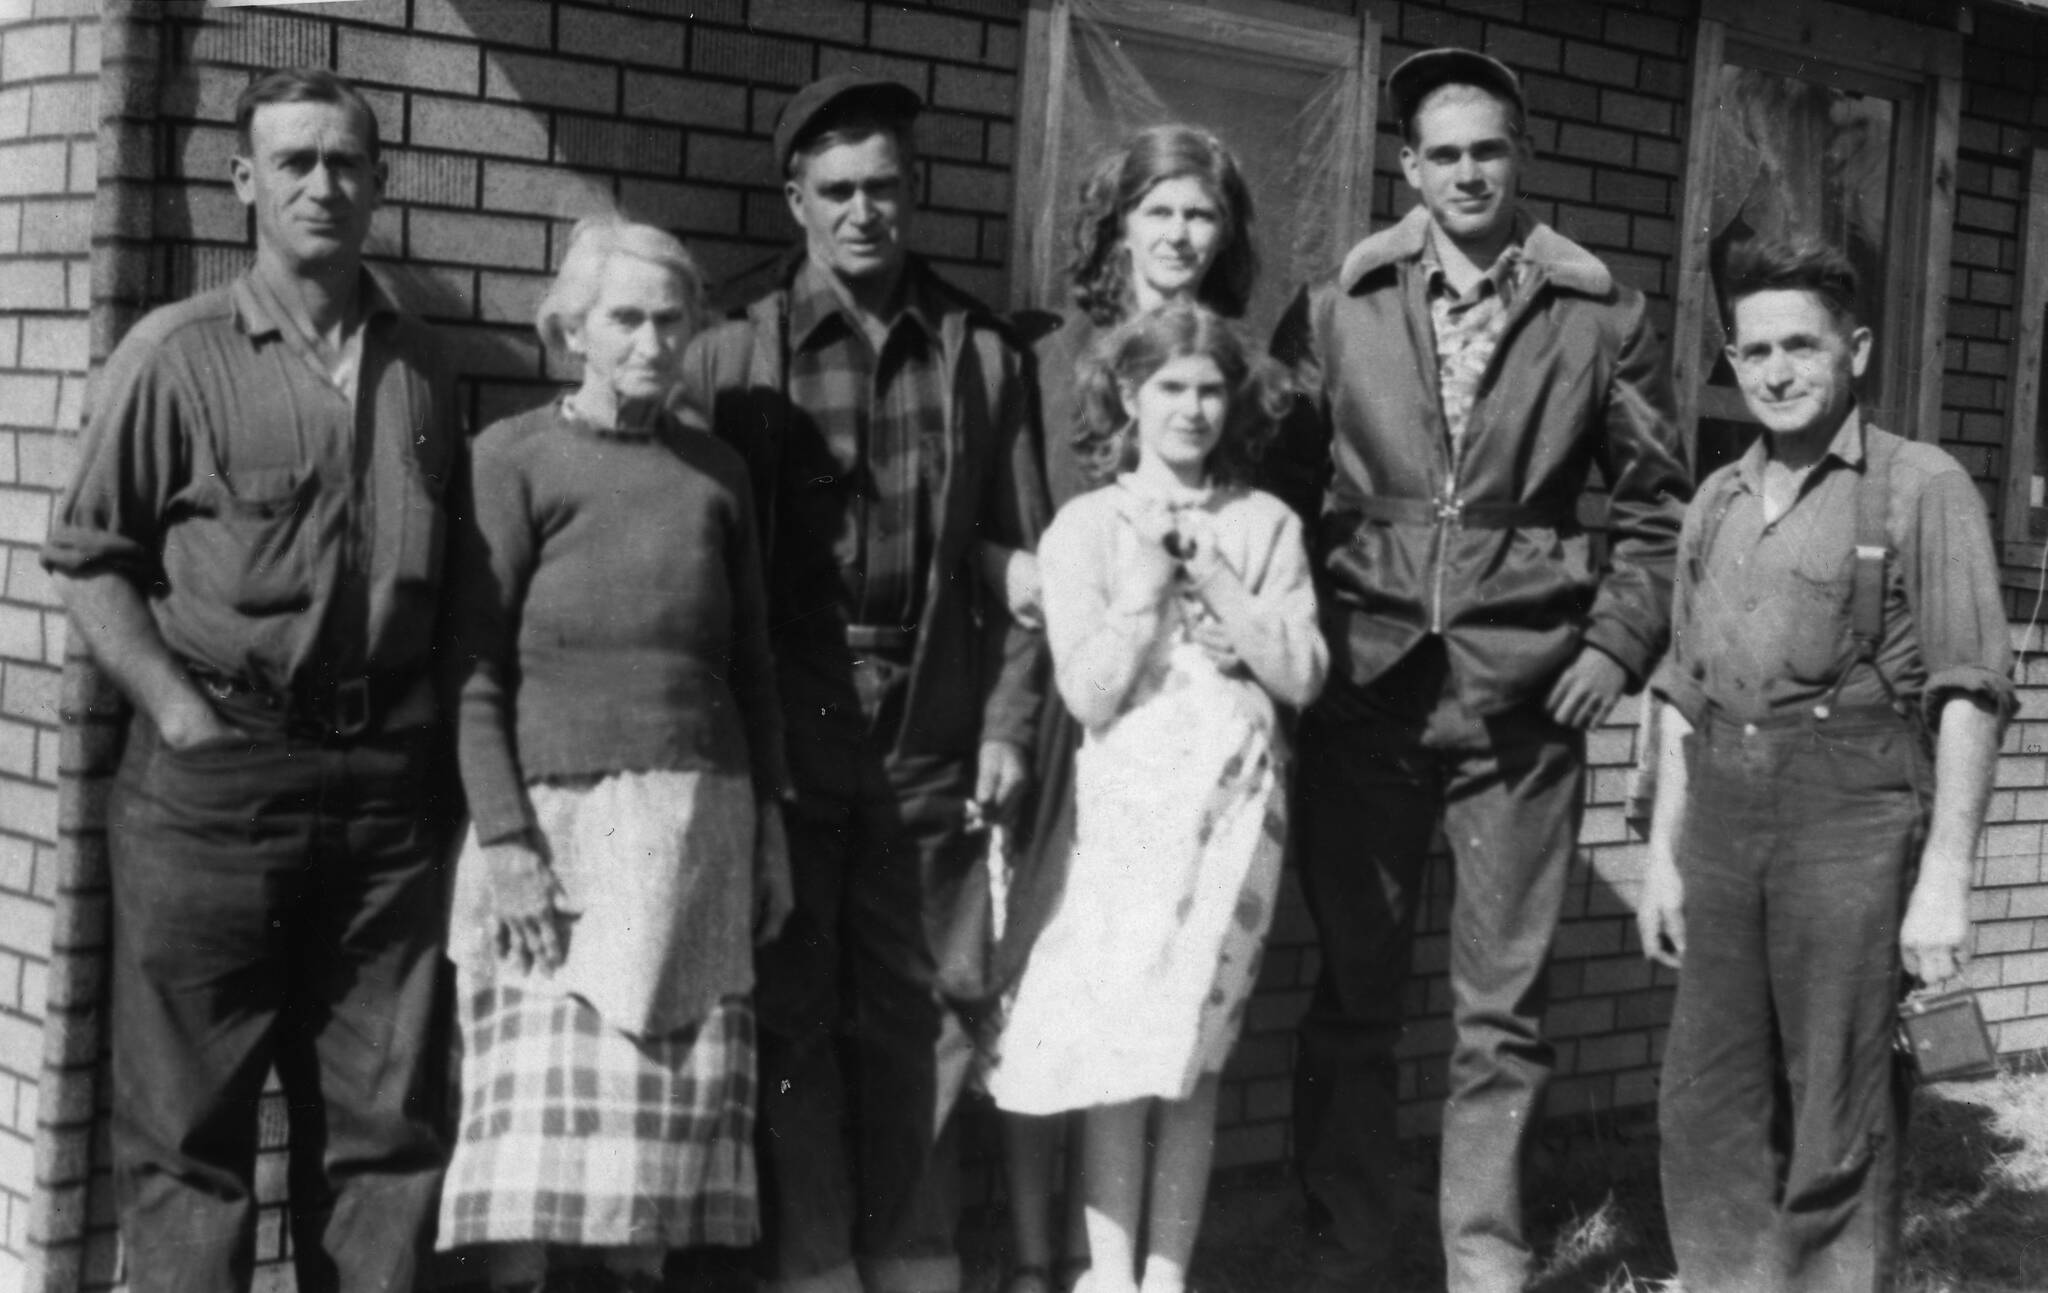 Photo courtesy of the Keeler Family Collection
Some of the Keelers assembled with family matriarch Samantha (second from left) in this 1952 photograph taken in Oregon. Others, L-R: George, Lawrence with wife Lorna, daughter April and son Larry, and Floyd, also known as “Uncle Shorty.”